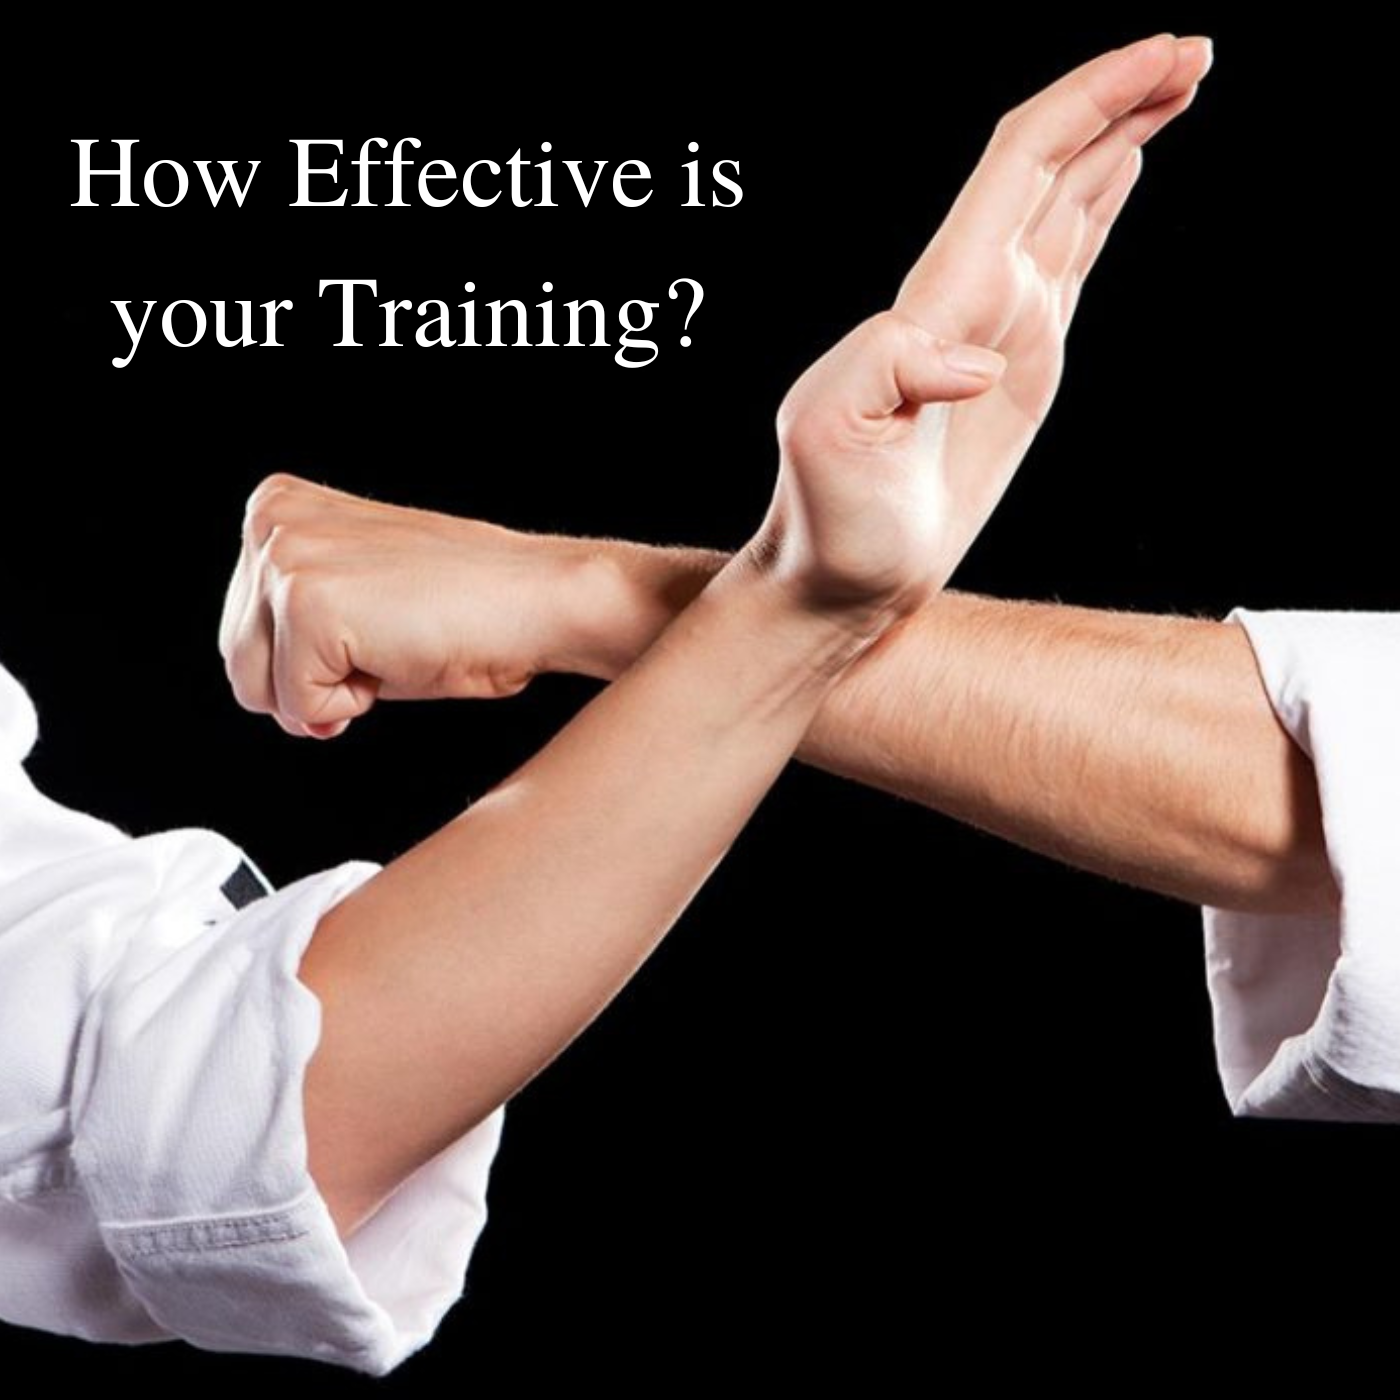 * How Effective is your Training?